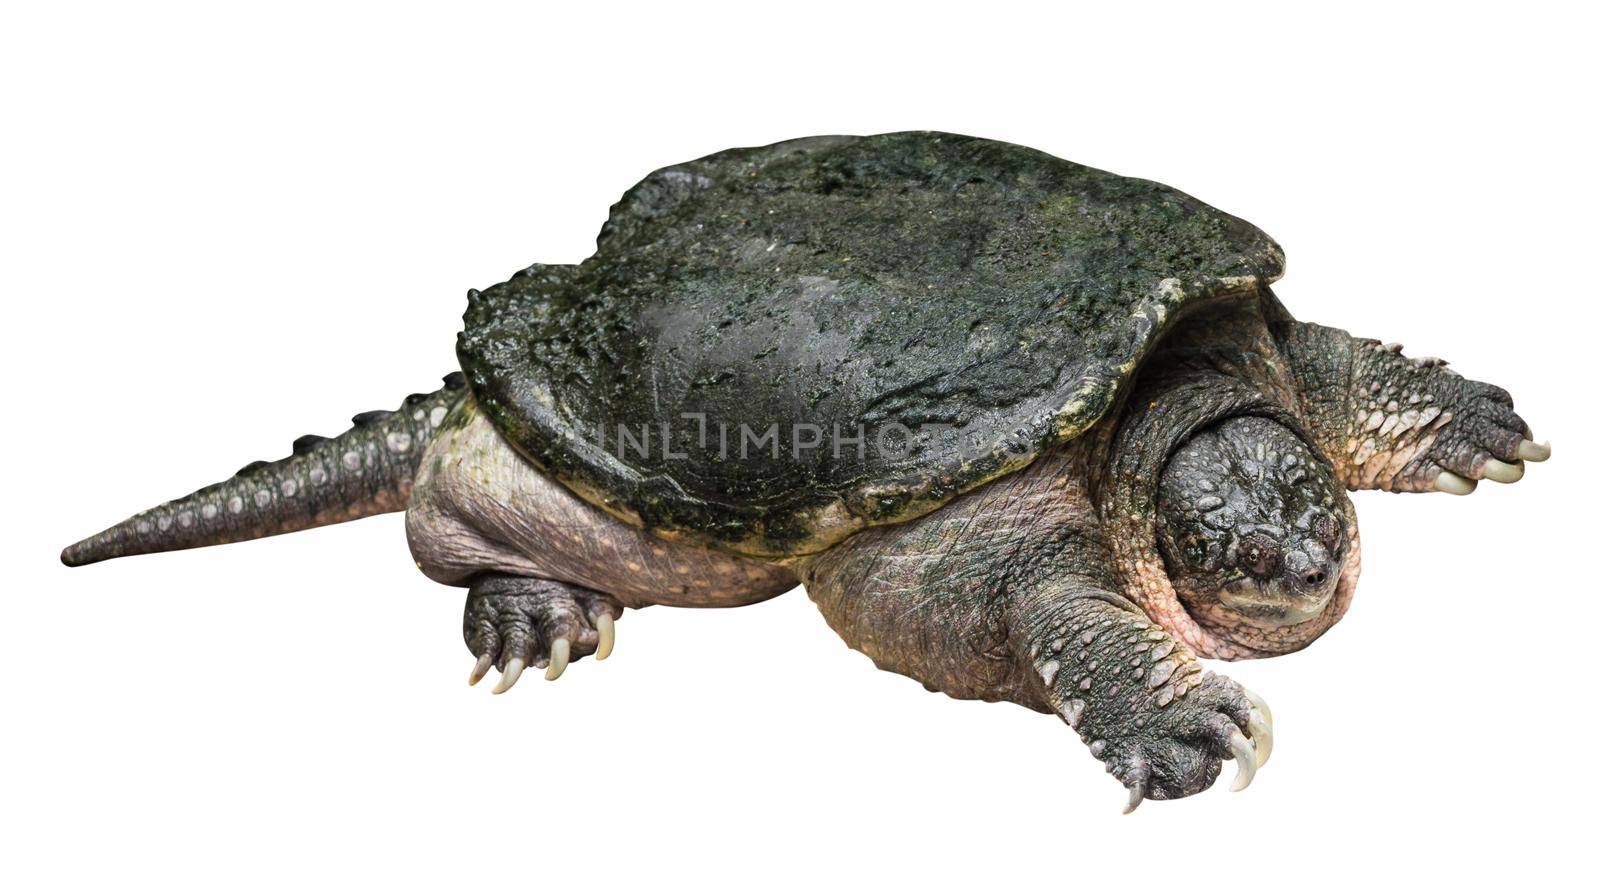 Snapping turtle ( Chelydra serpentina ) is creeping and raise one's head on white isolated background . Side view . by stockdevil